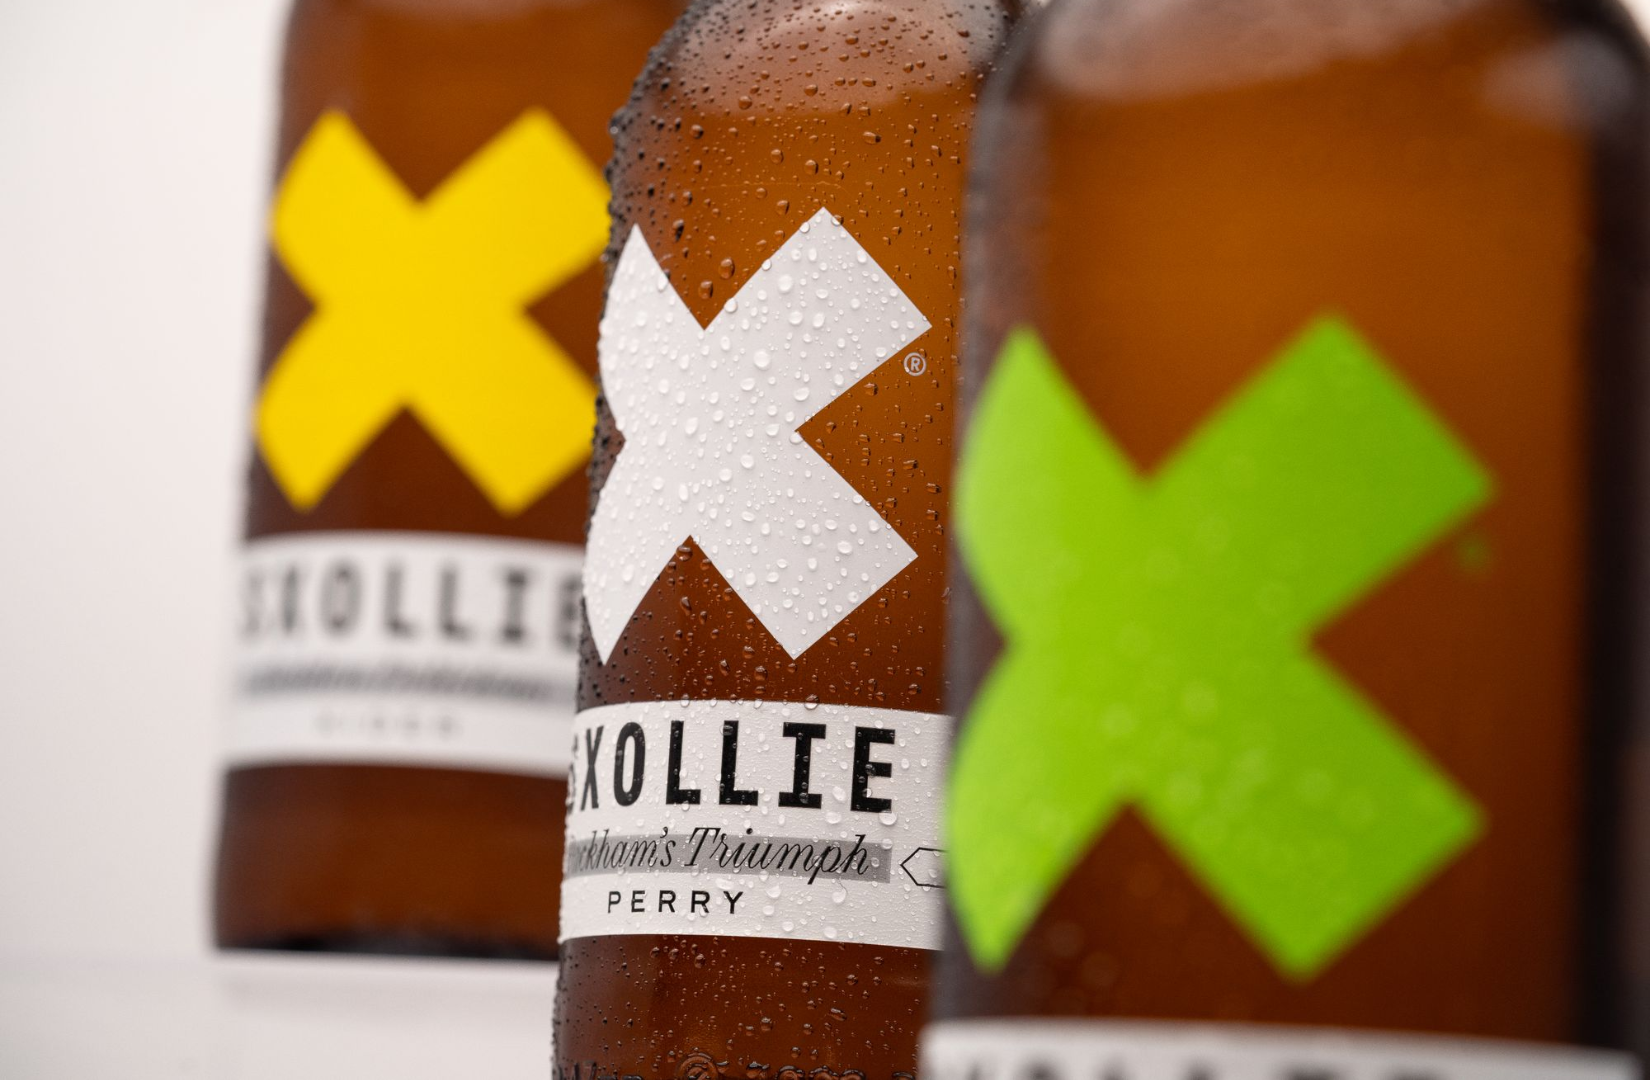 Sxollie’s sustainable cider is carbon neutral and named Best Cider in the World